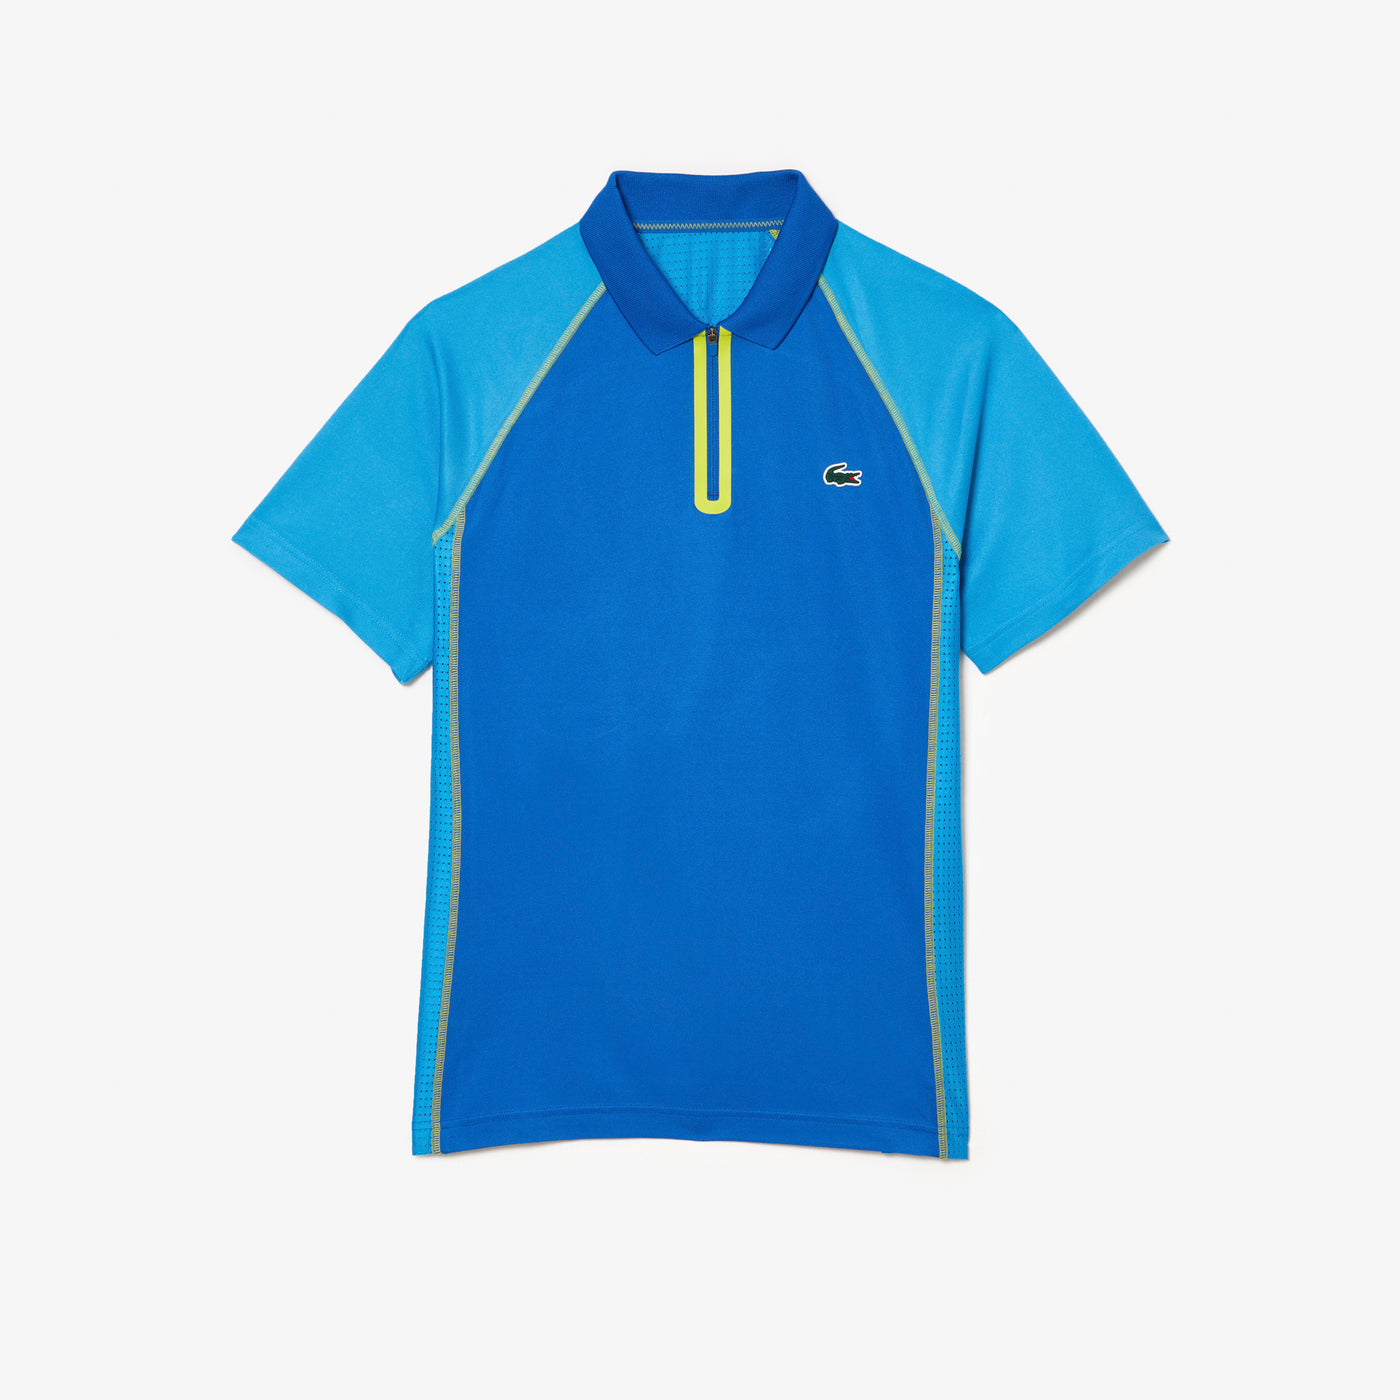 Shop The Latest Collection Of Lacoste Men’S Lacoste Tennis Recycled Polyester Polo Shirt With Ultra-Dry Technology - Dh5046 In Lebanon